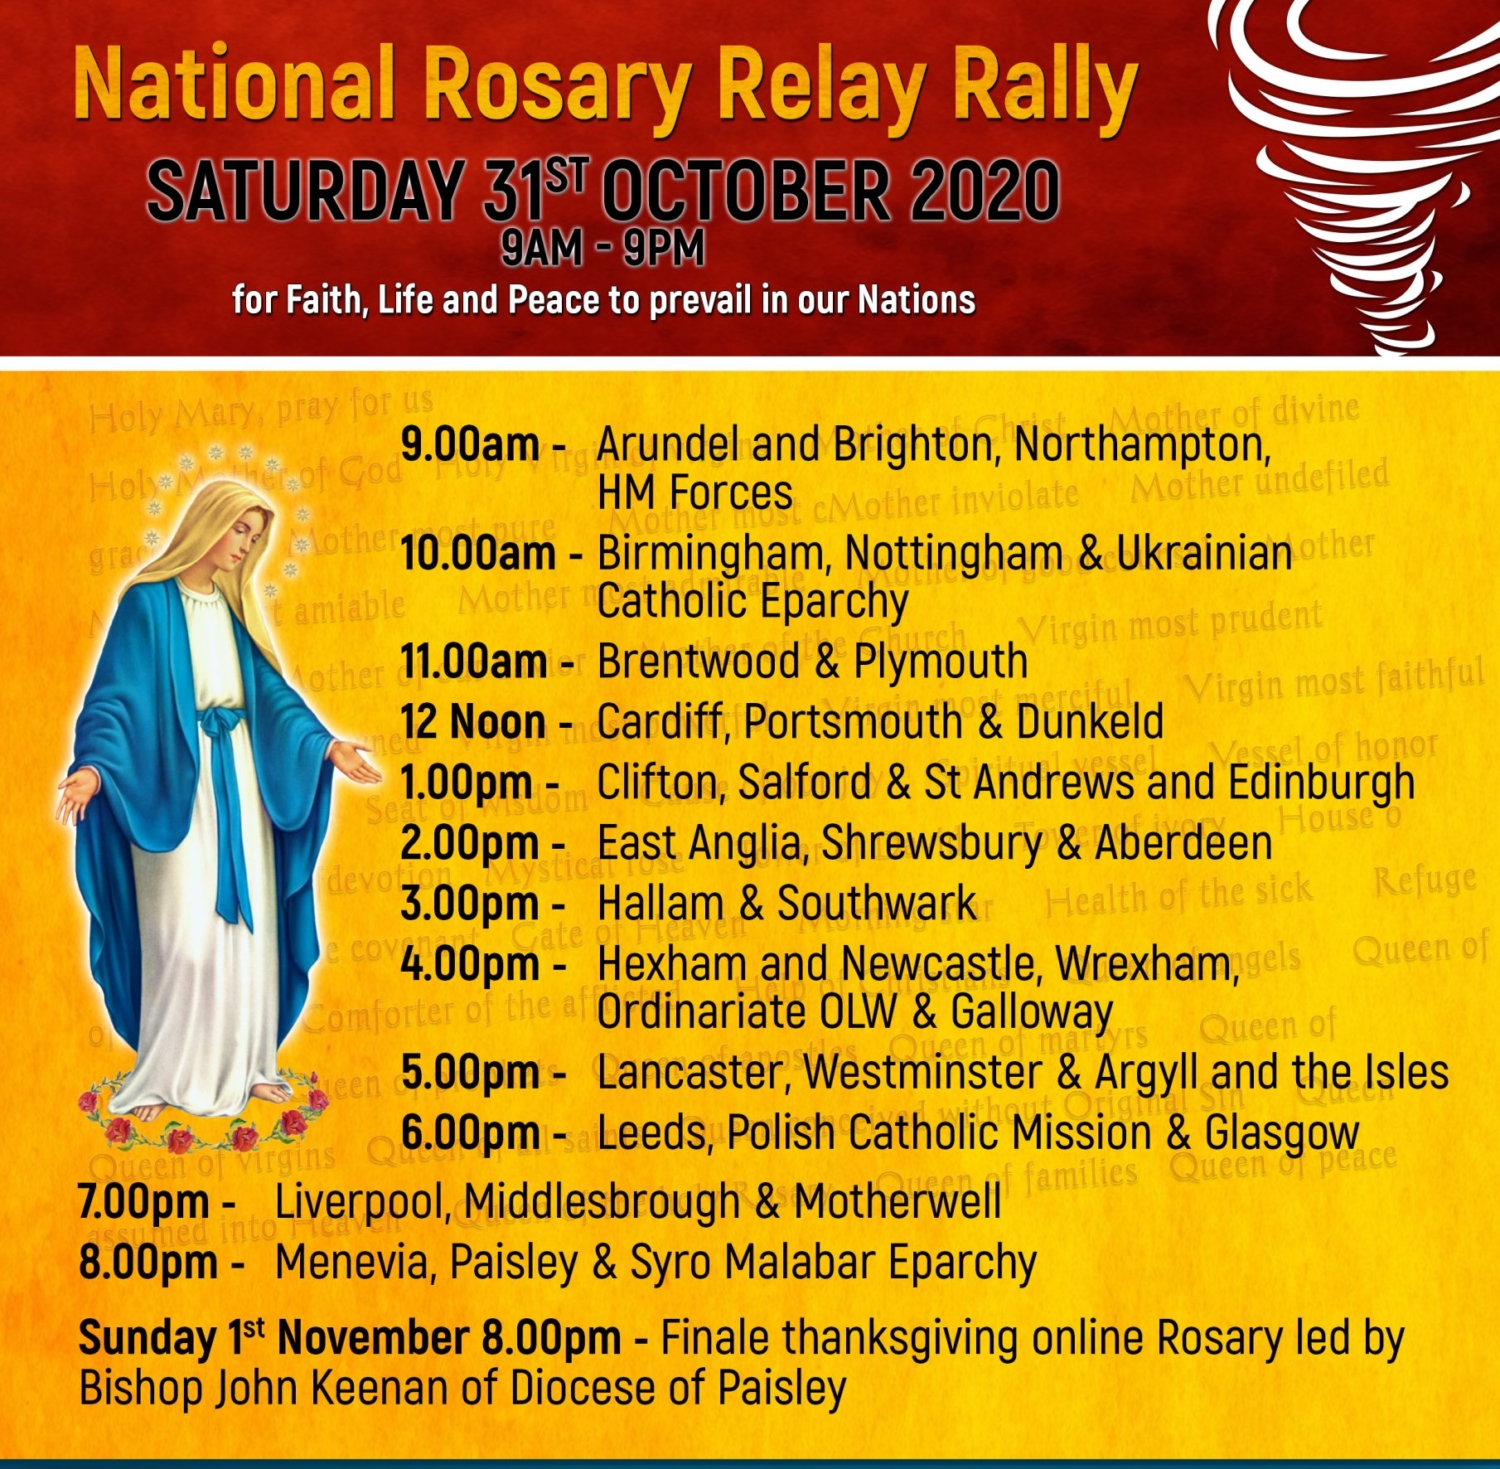 Take part in a National Rosary Relay Rally on 31 October Brentwood